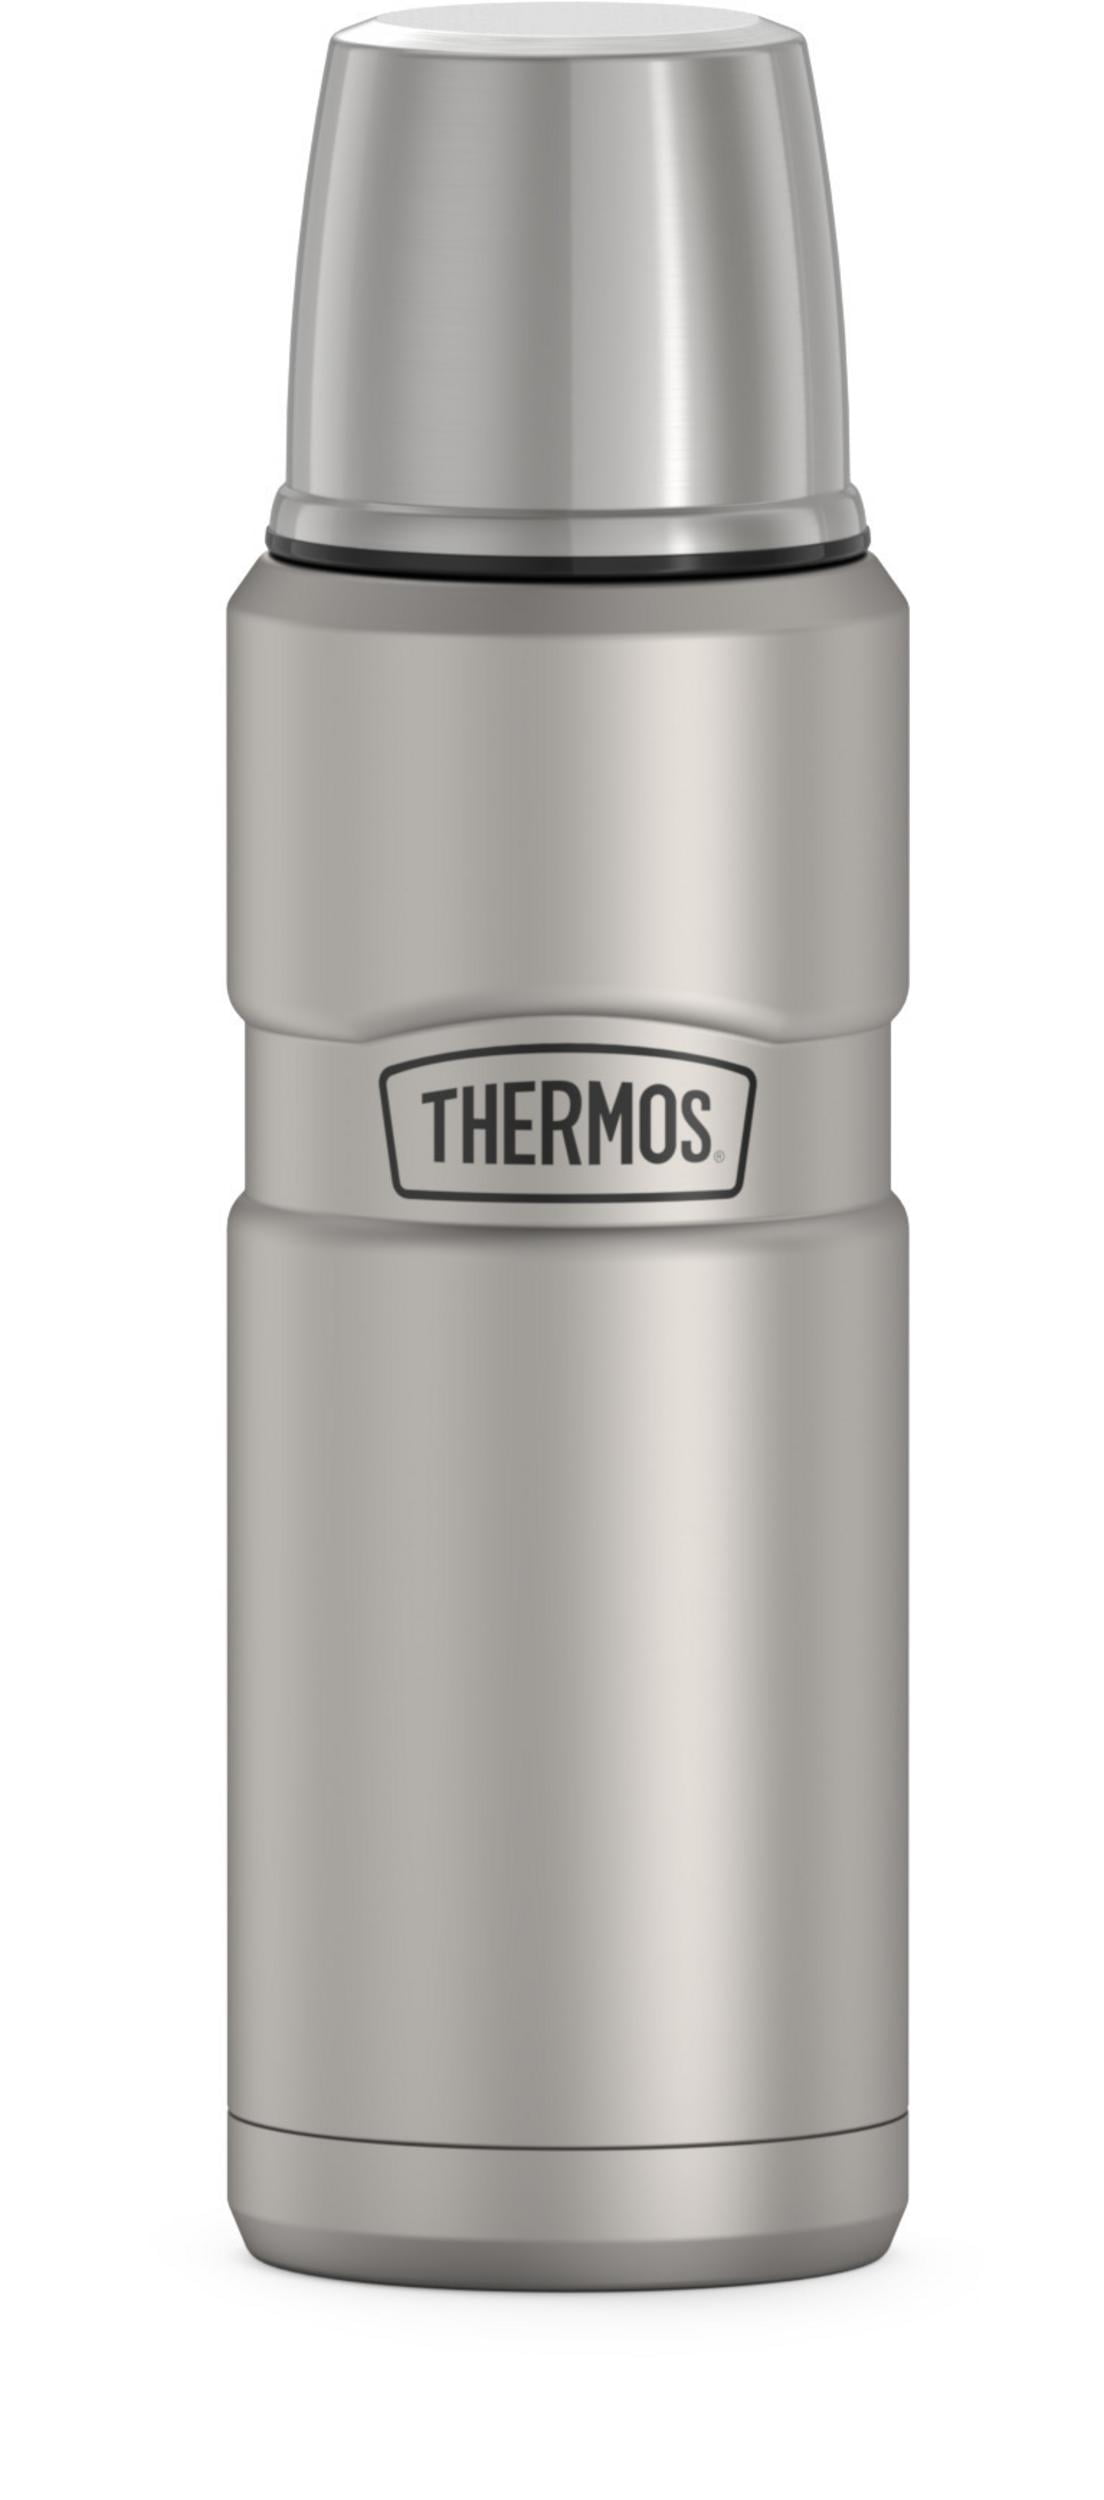 Thermos Vacuum Insulated Stainless Steel Compact Beverage Bottle 